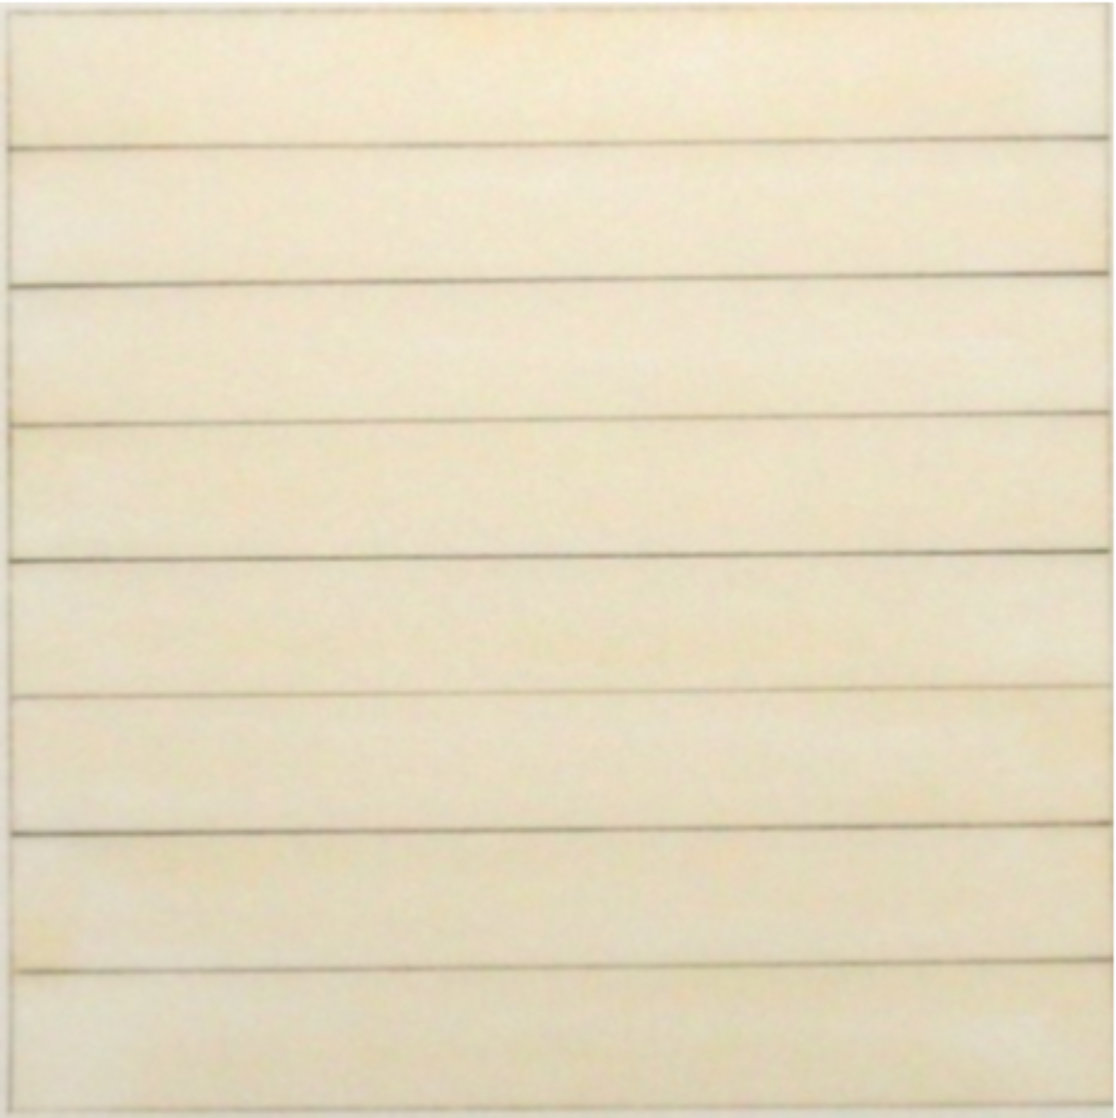 Untitled (Yellow) 1991 Limited Edition Print by Agnes Bernice Martin